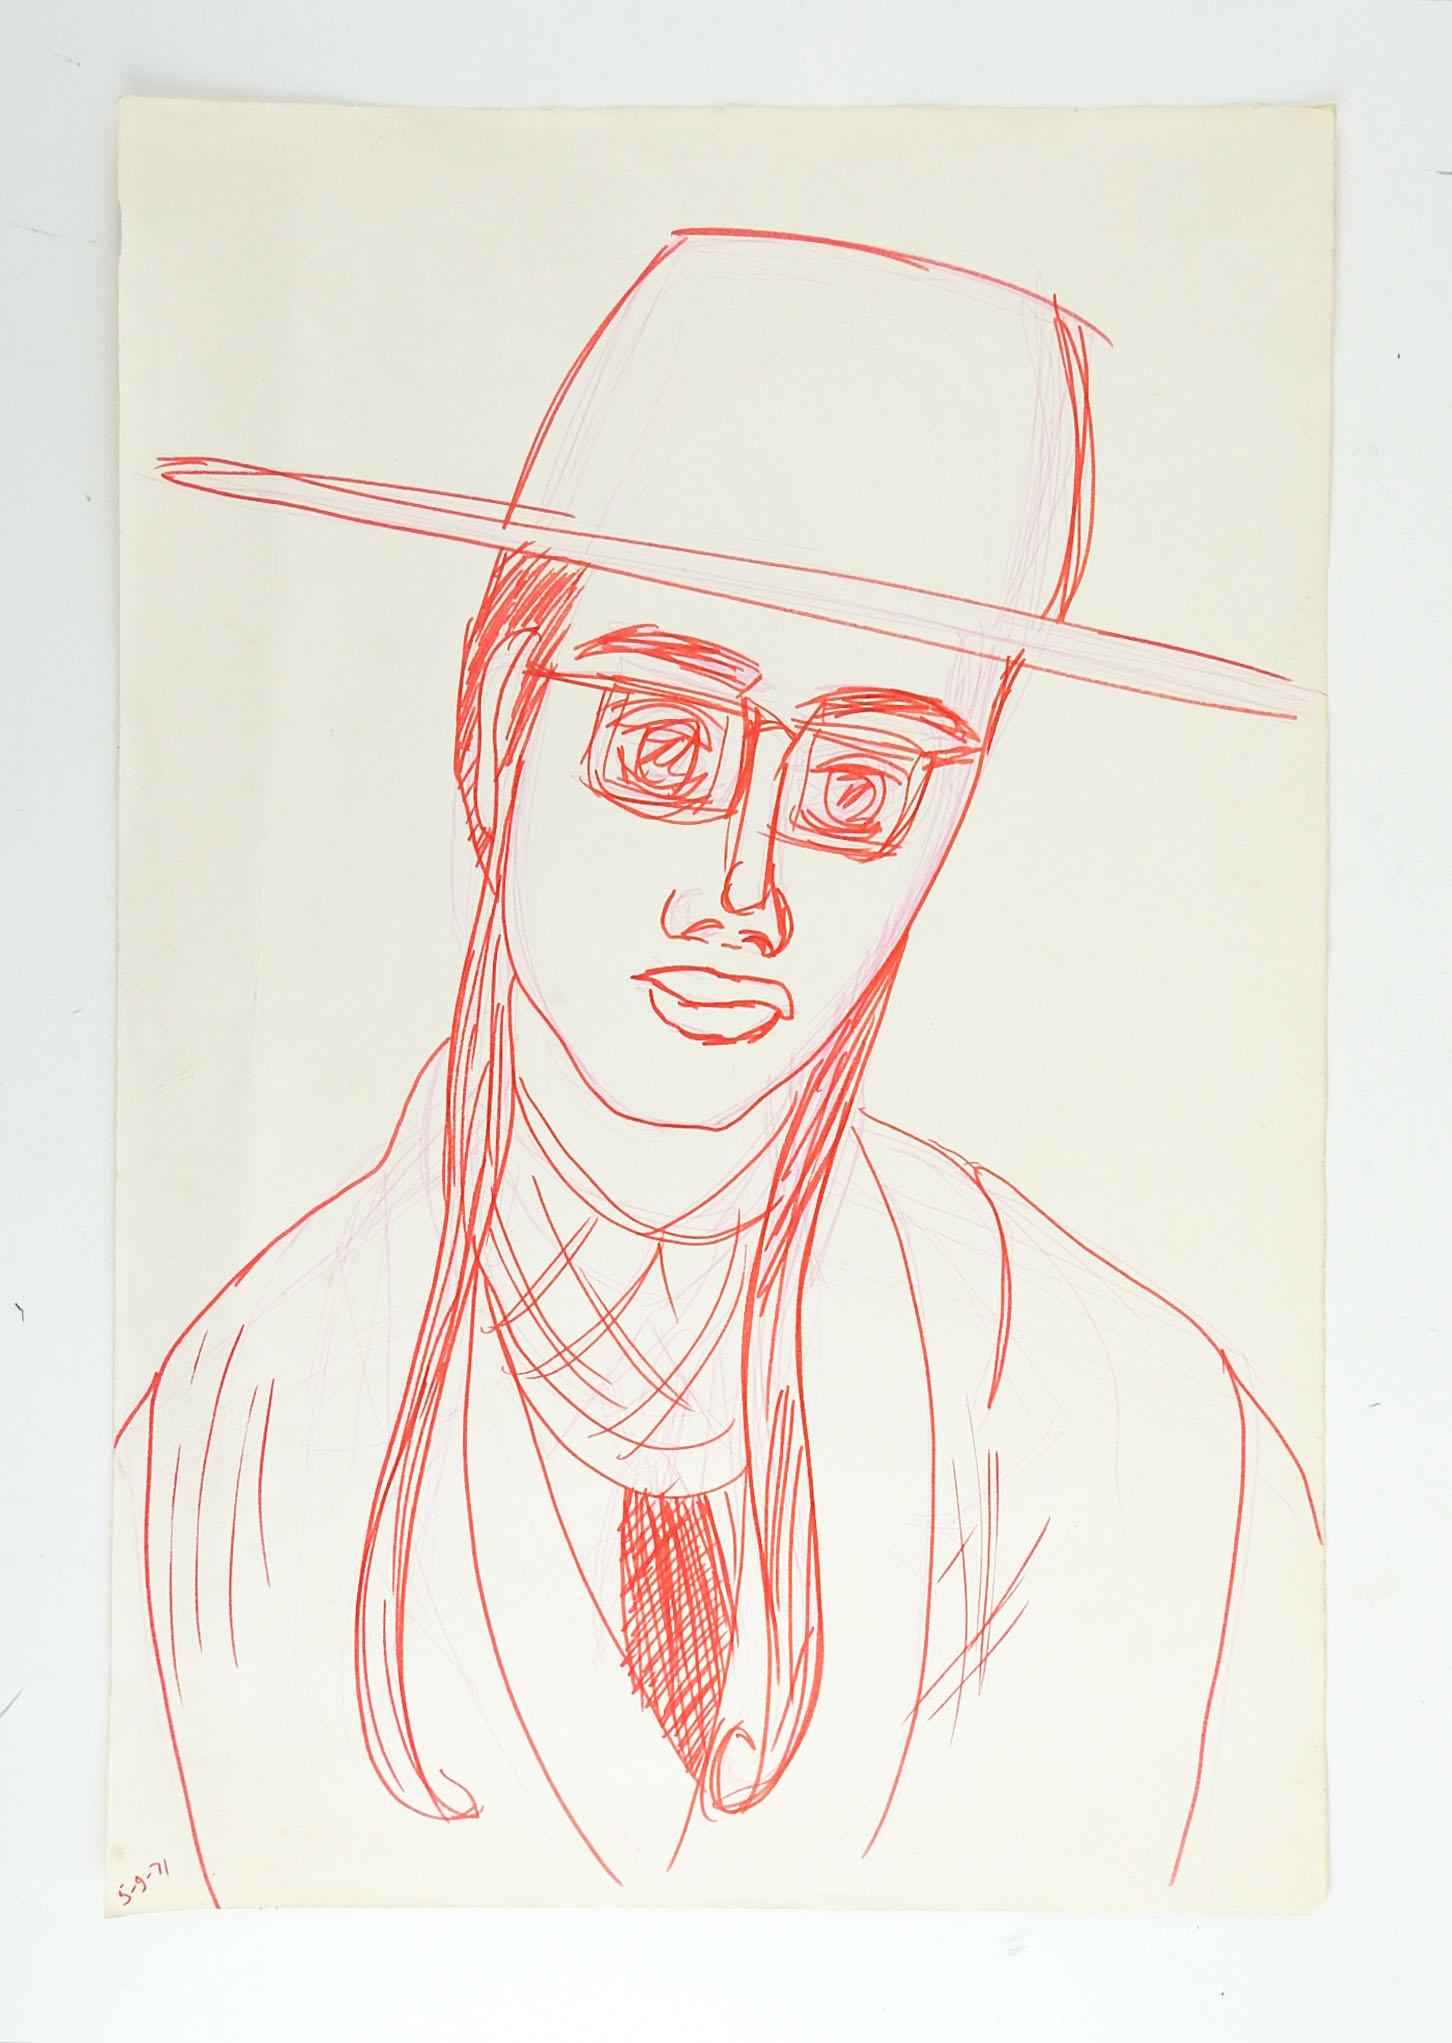 Red ink portrait drawing by Betty Lieberman Gerald (20th Century) Texas. Unsigned, dated 1971 lower left corner. Unframed, age toning, from the artists estate.